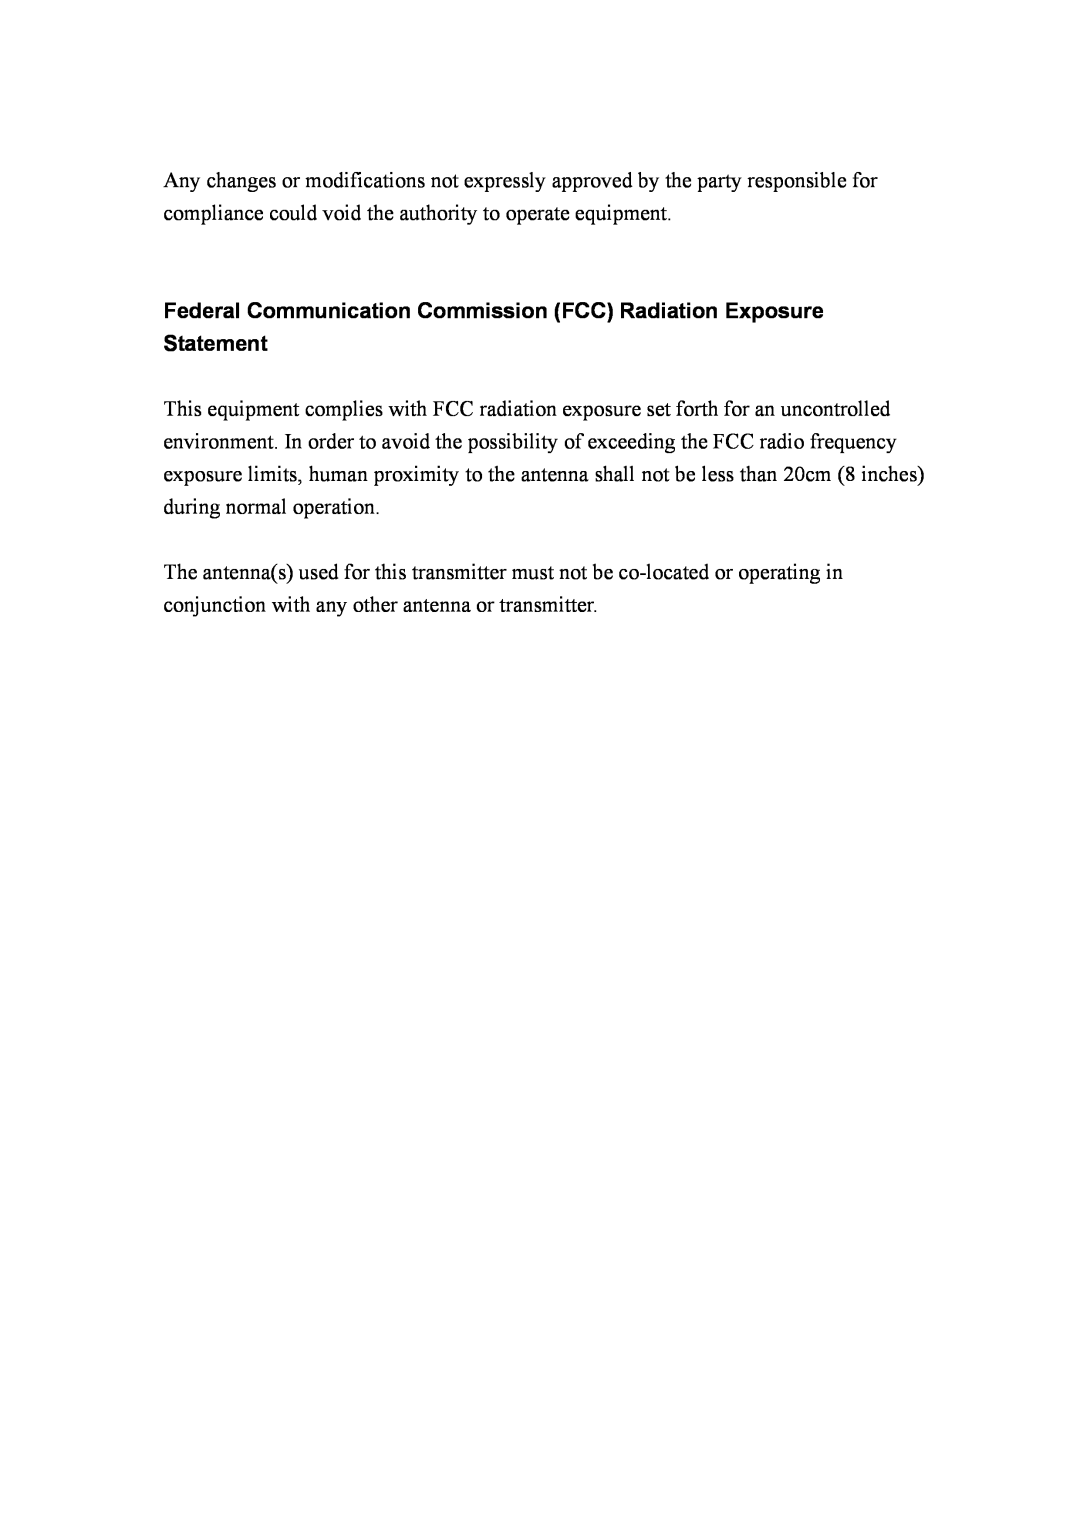 Intellinet Network Solutions INT-524315-UM-0808-1 Federal Communication Commission FCC Radiation Exposure Statement 